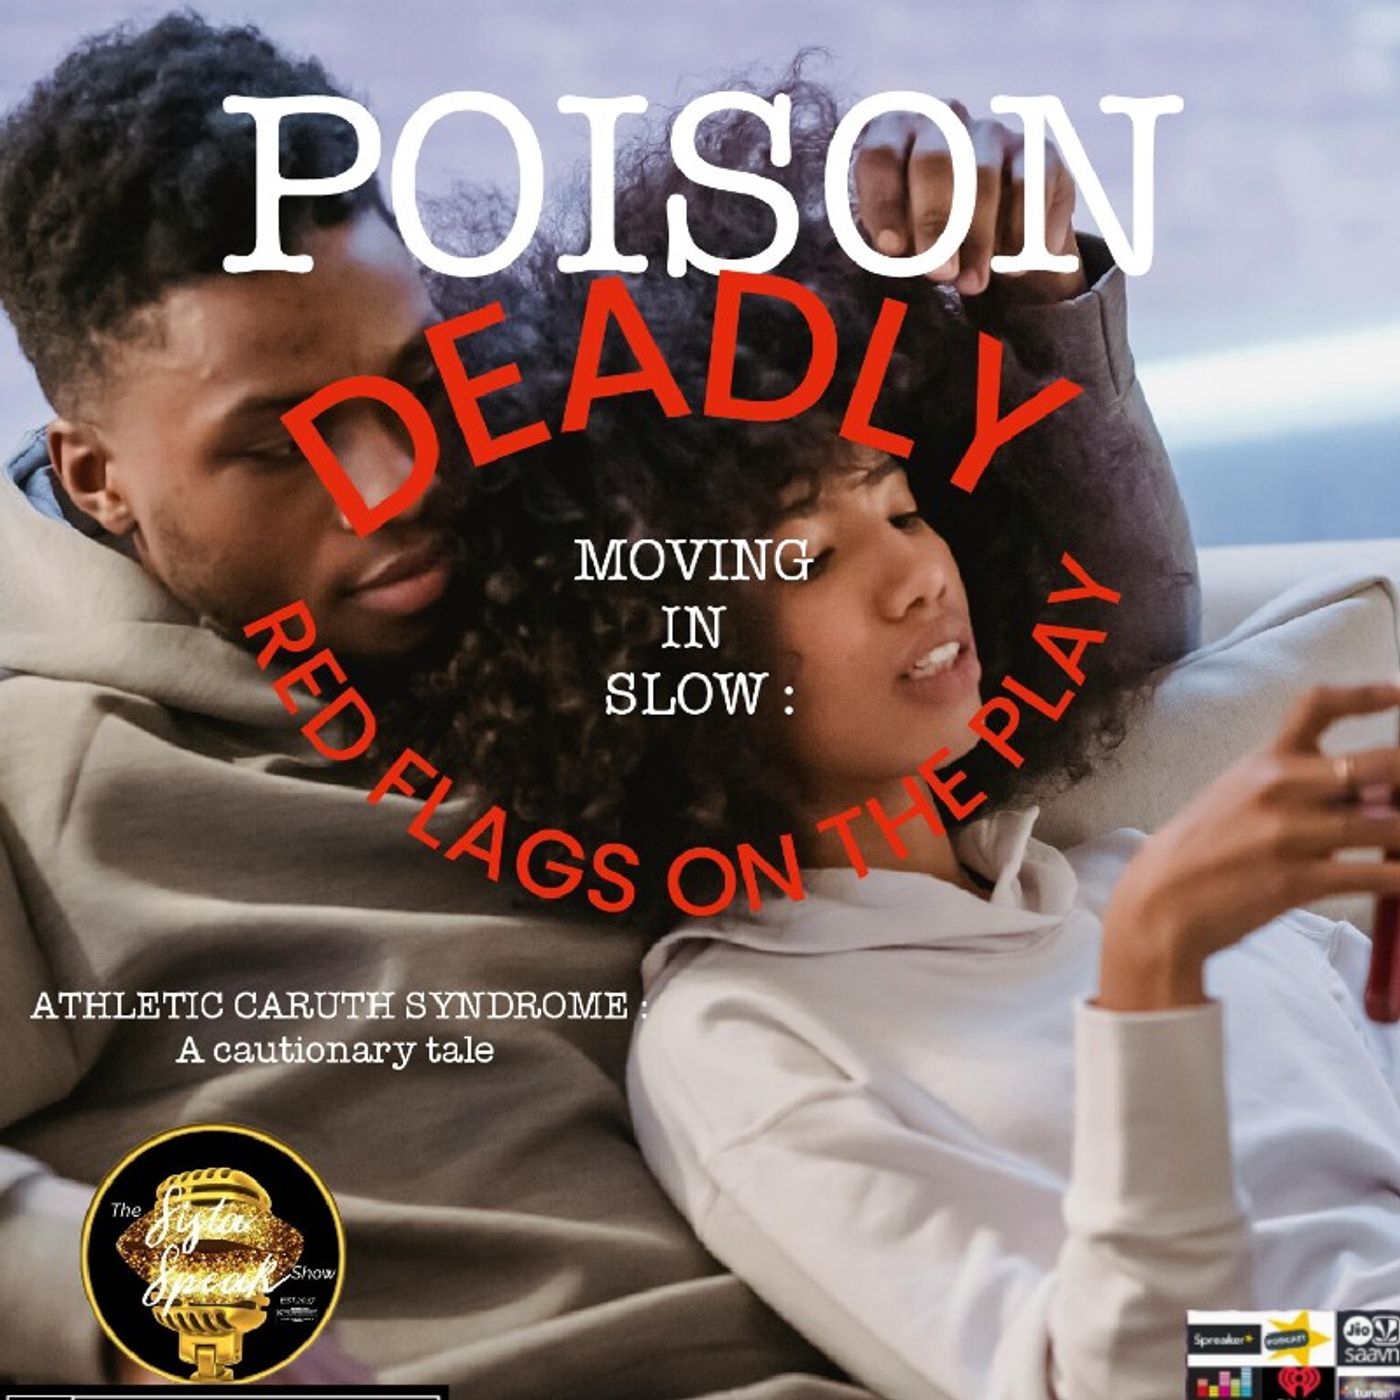 TSF: POISON DEADLY MOVING IN SLOW RED FLAGS ON THE PLAY